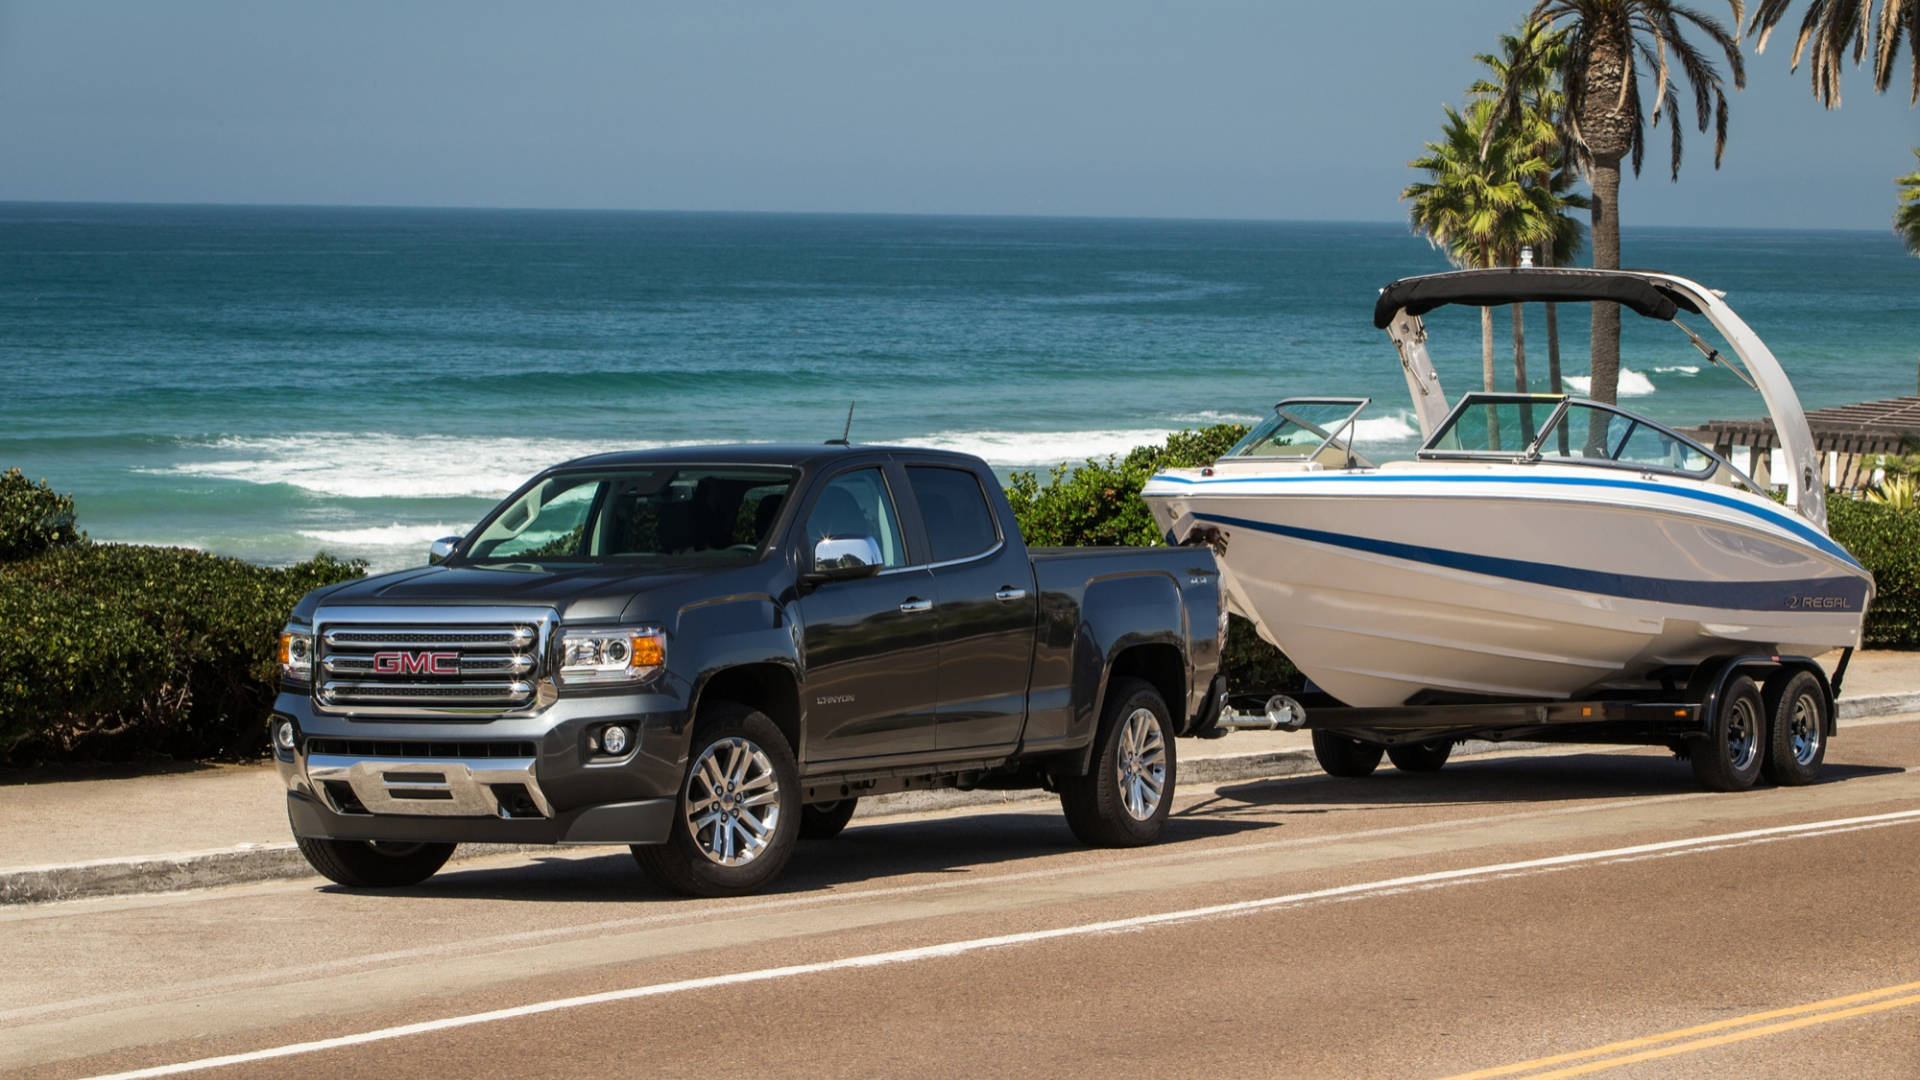 Adventurous Trip With Gmc Vehicle And Motor Boat